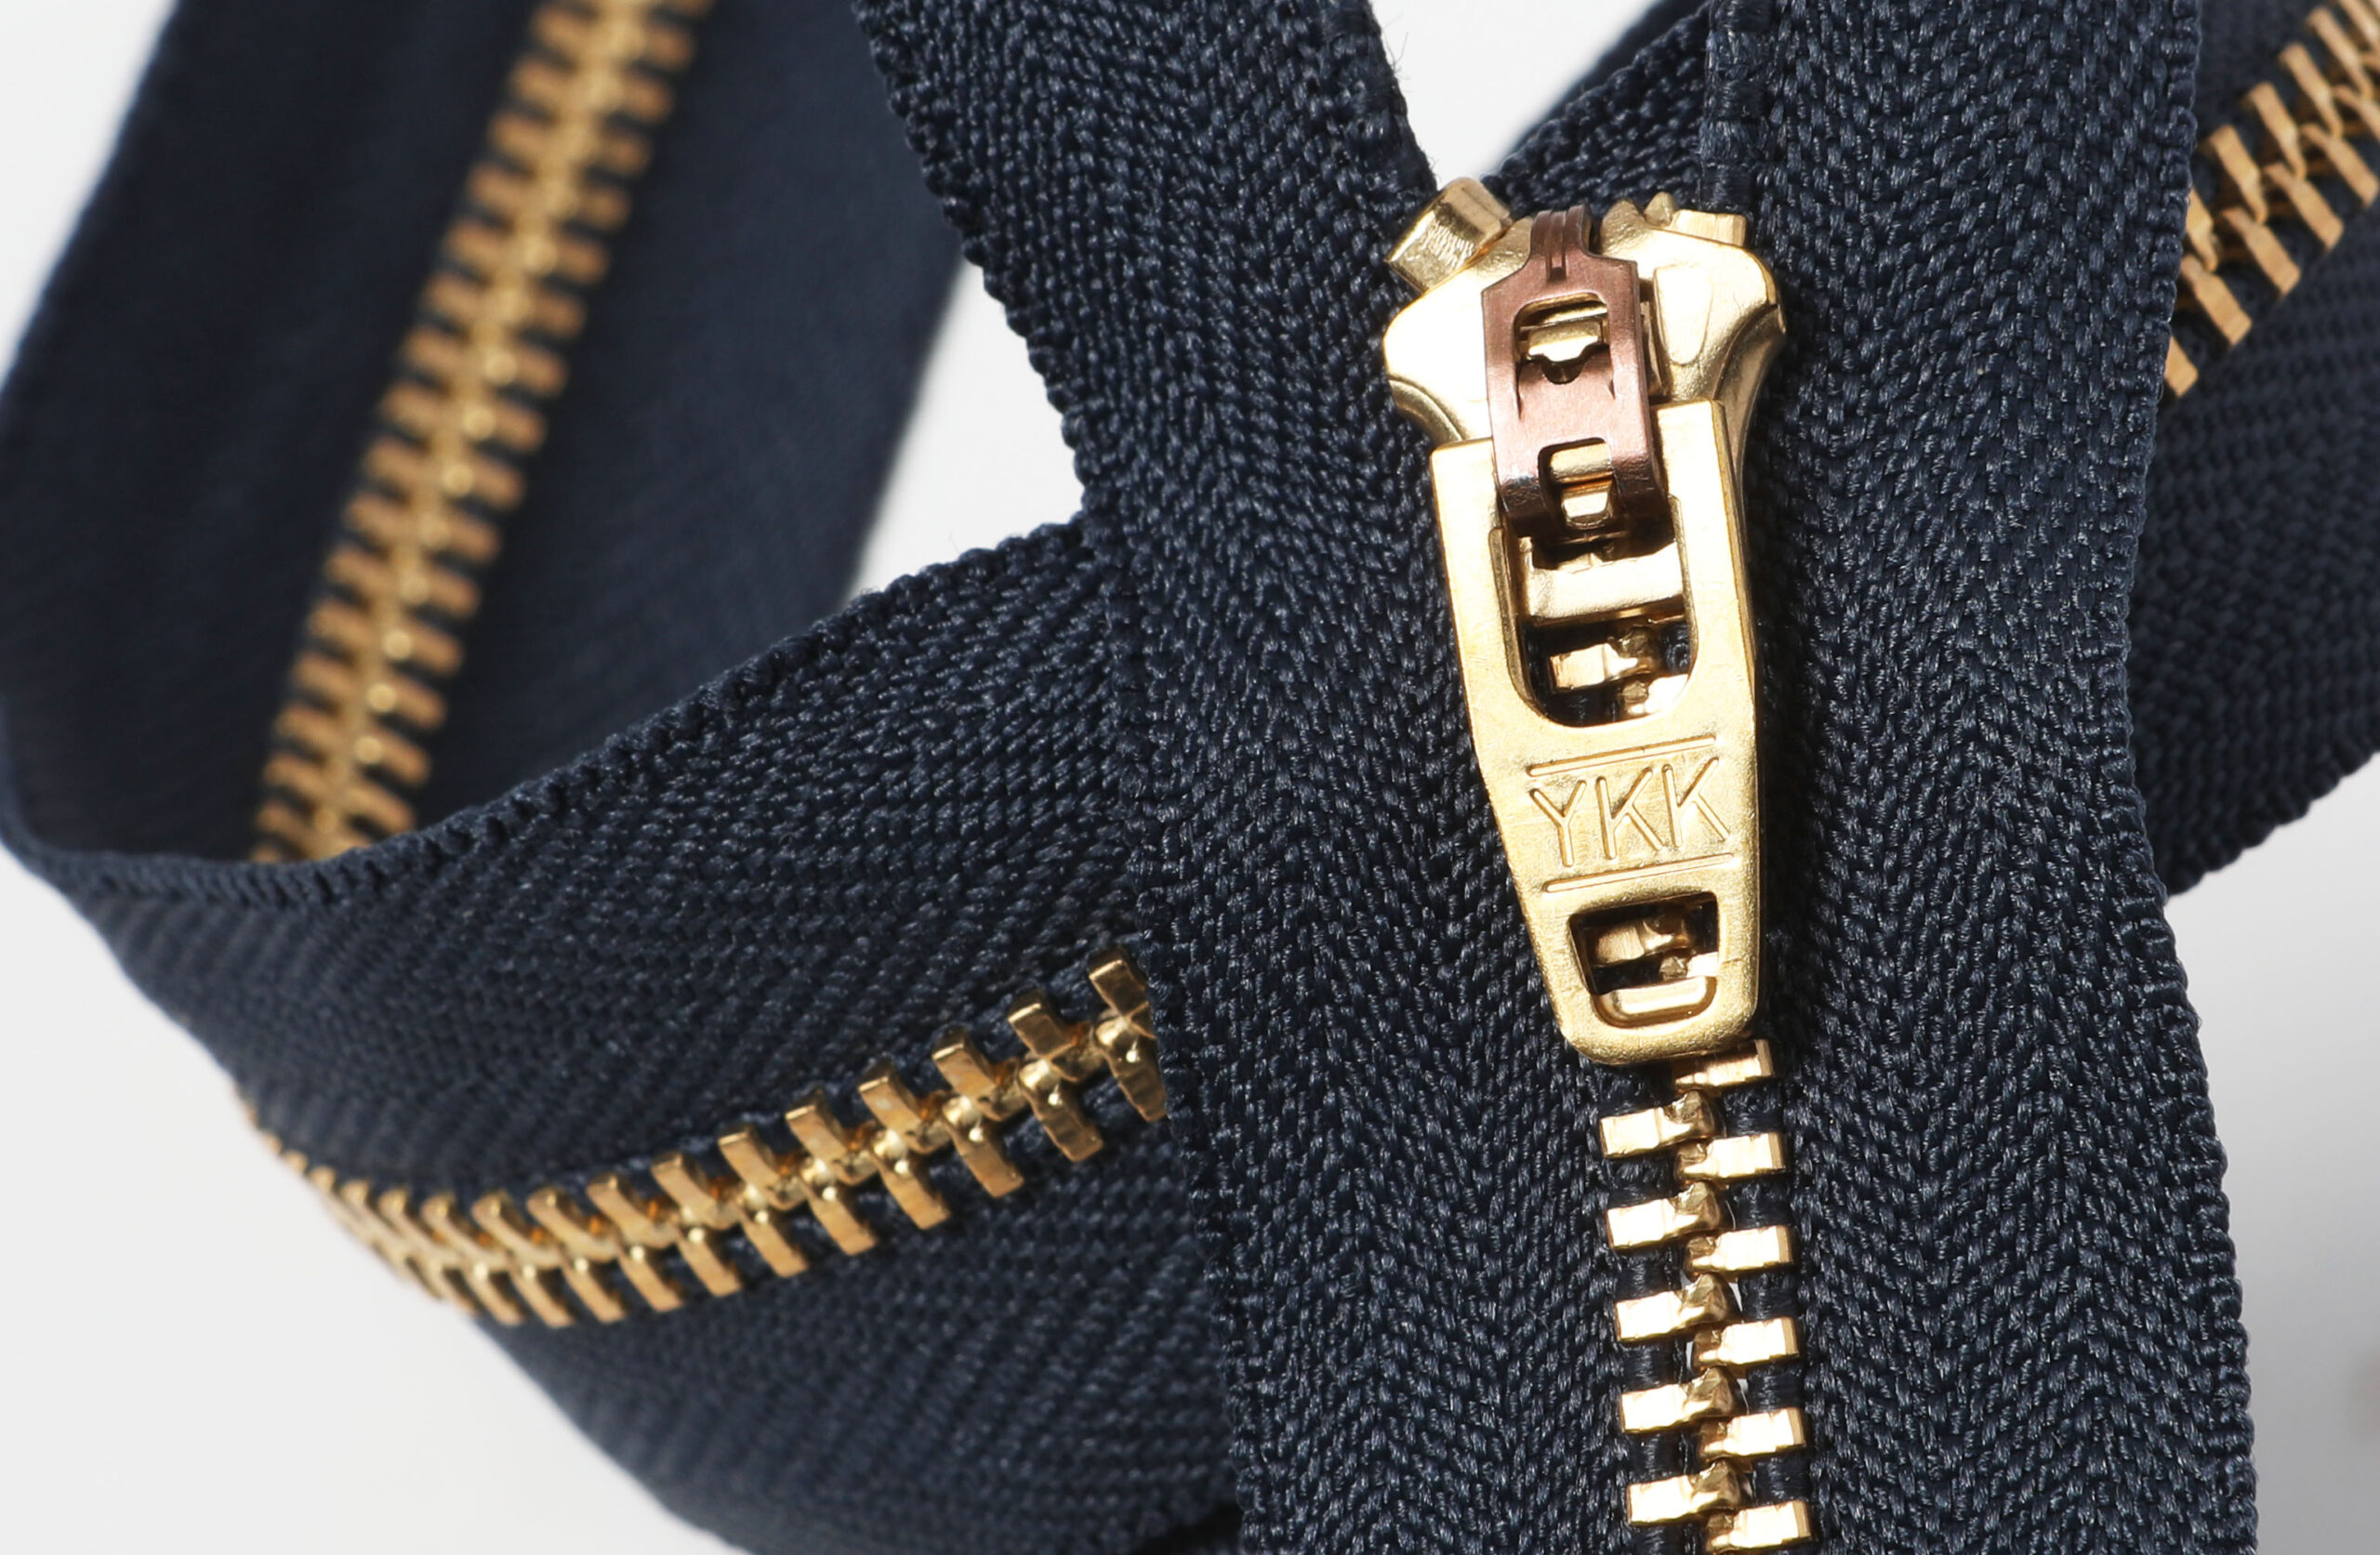 YKK zippers: Why so many designers use them.